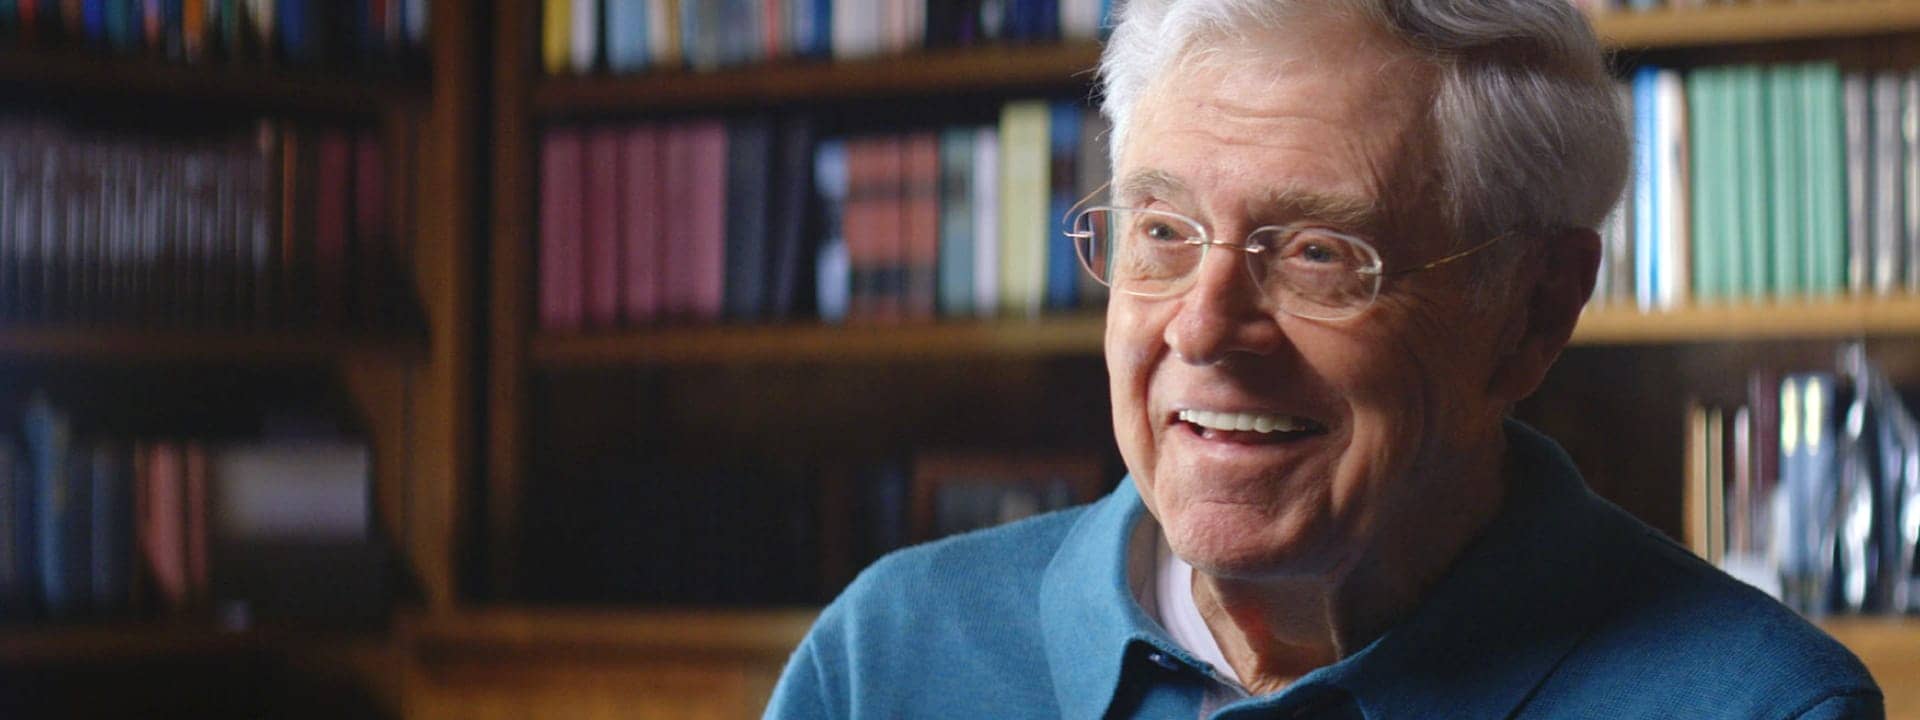 Charles Koch in front of a book shelf